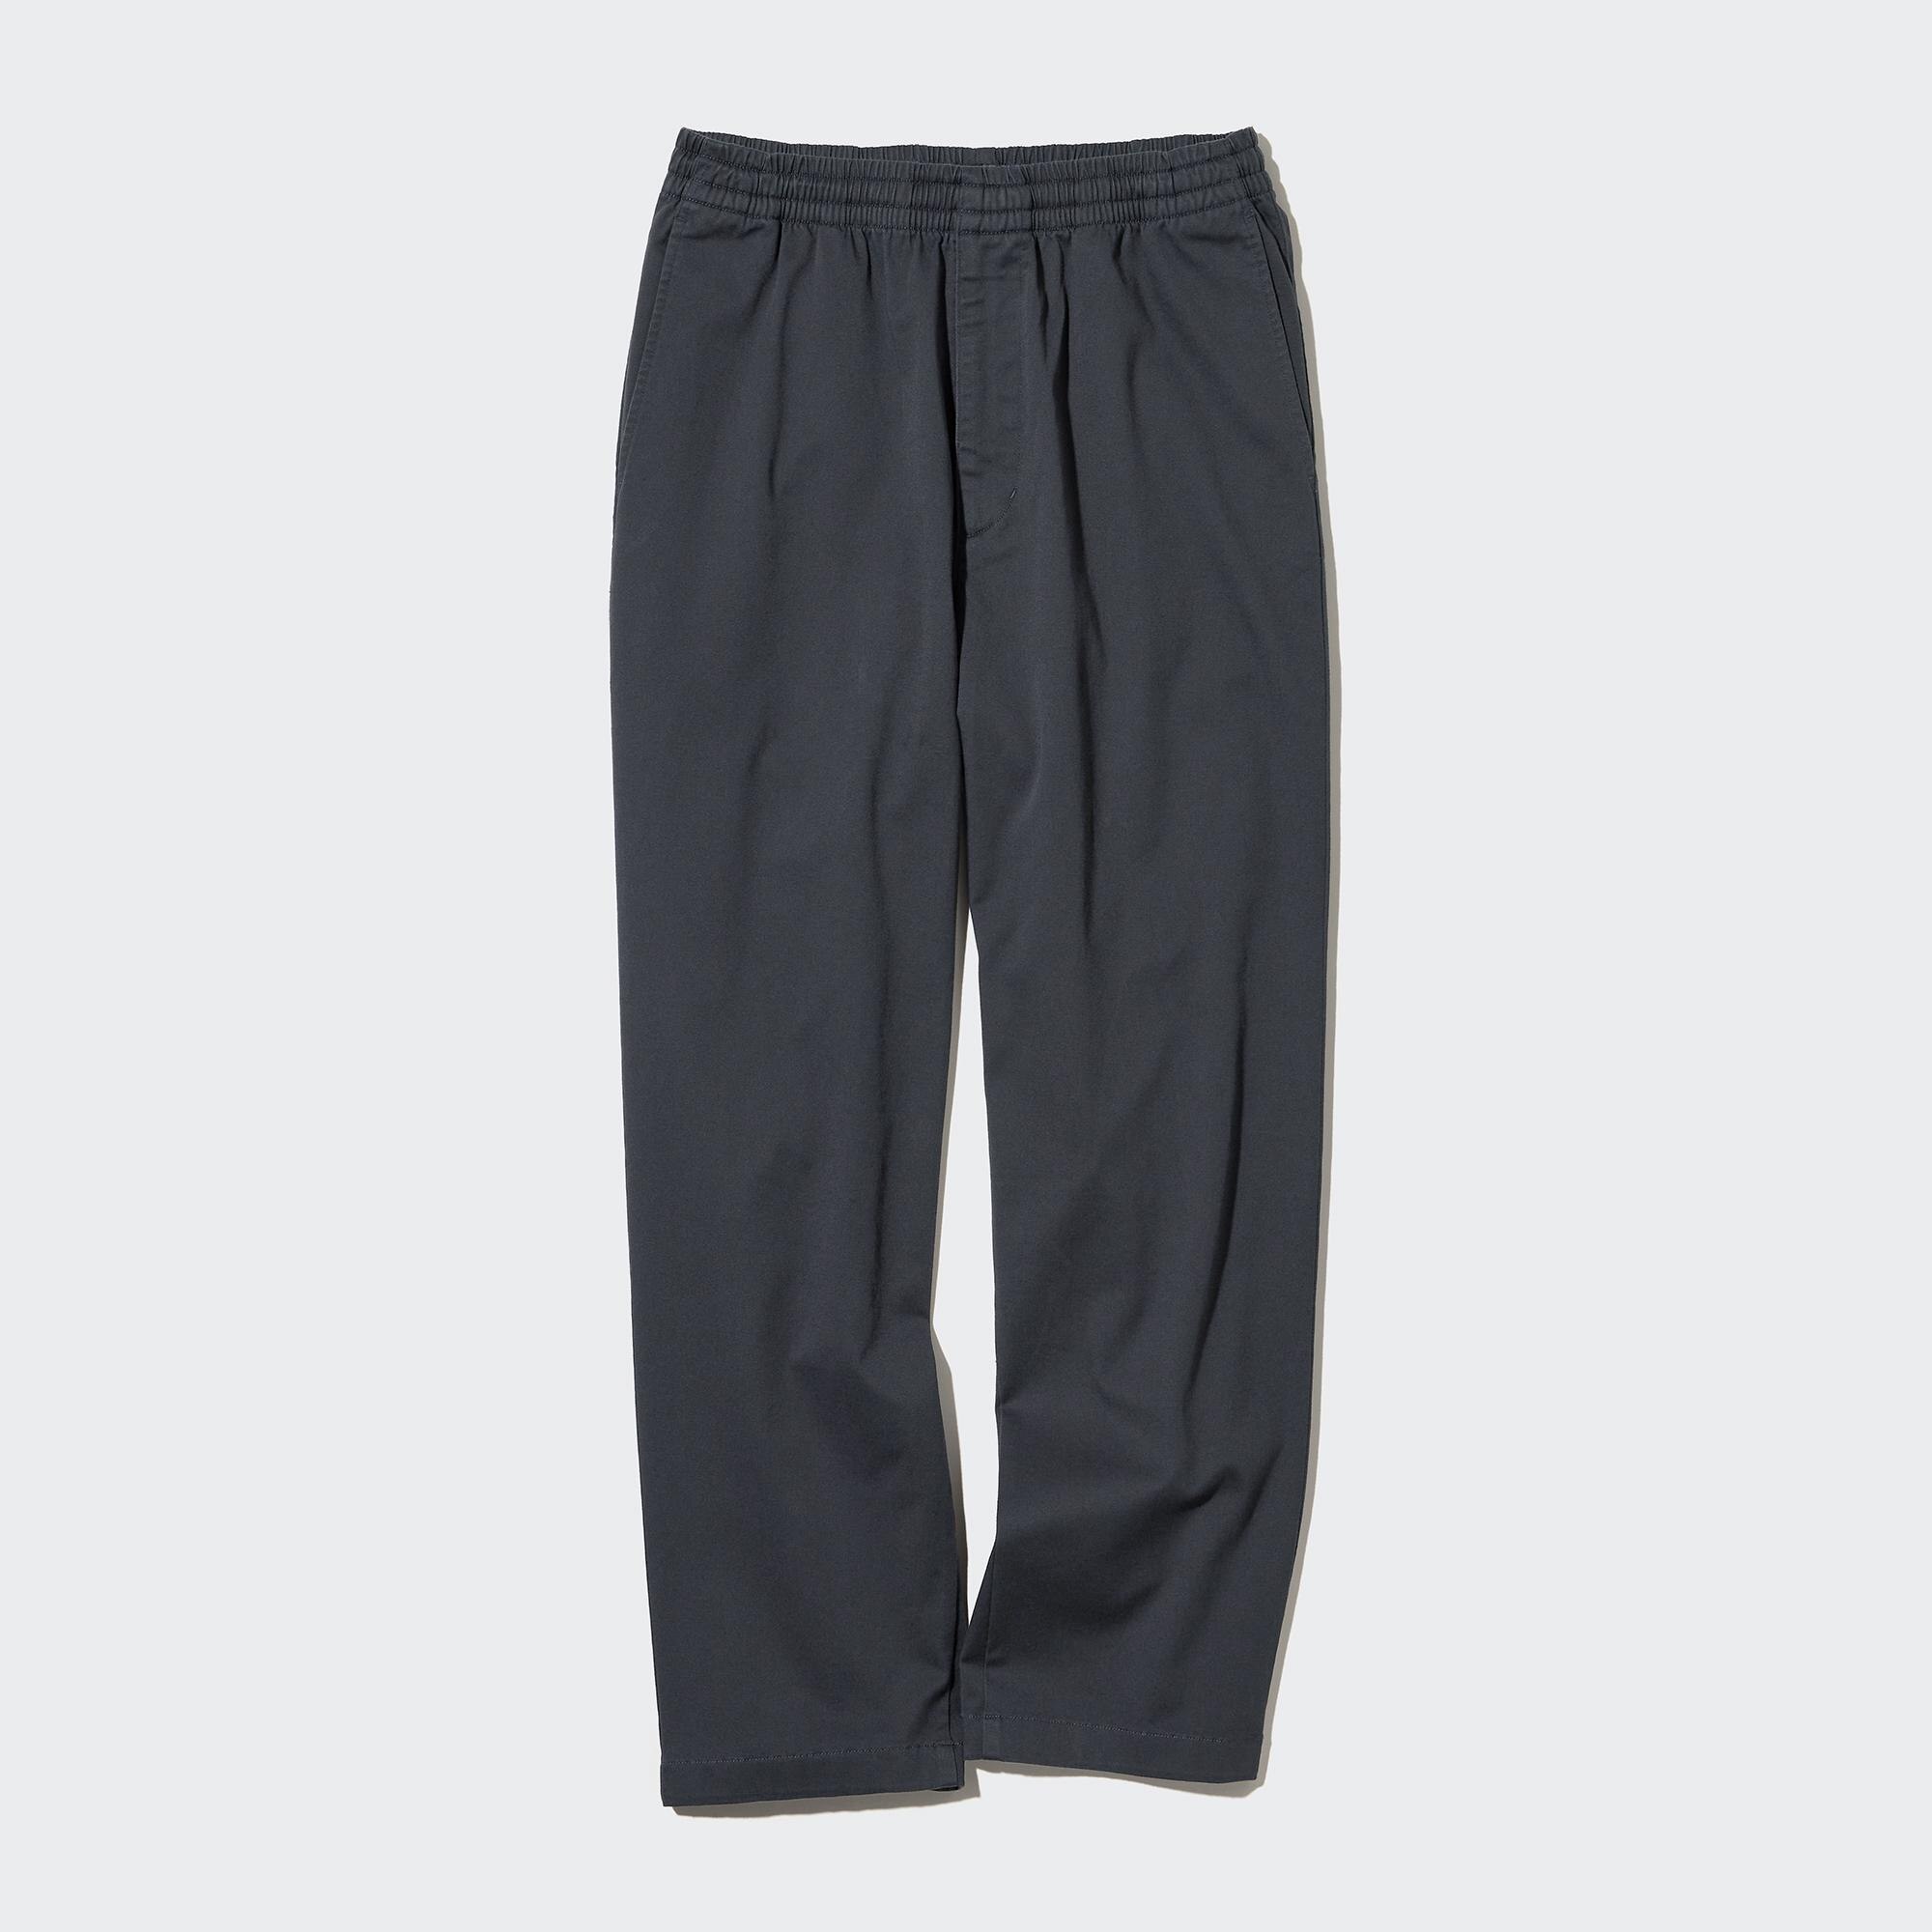 Cotton Relaxed Fit Ankle Length Trousers | UNIQLO UK